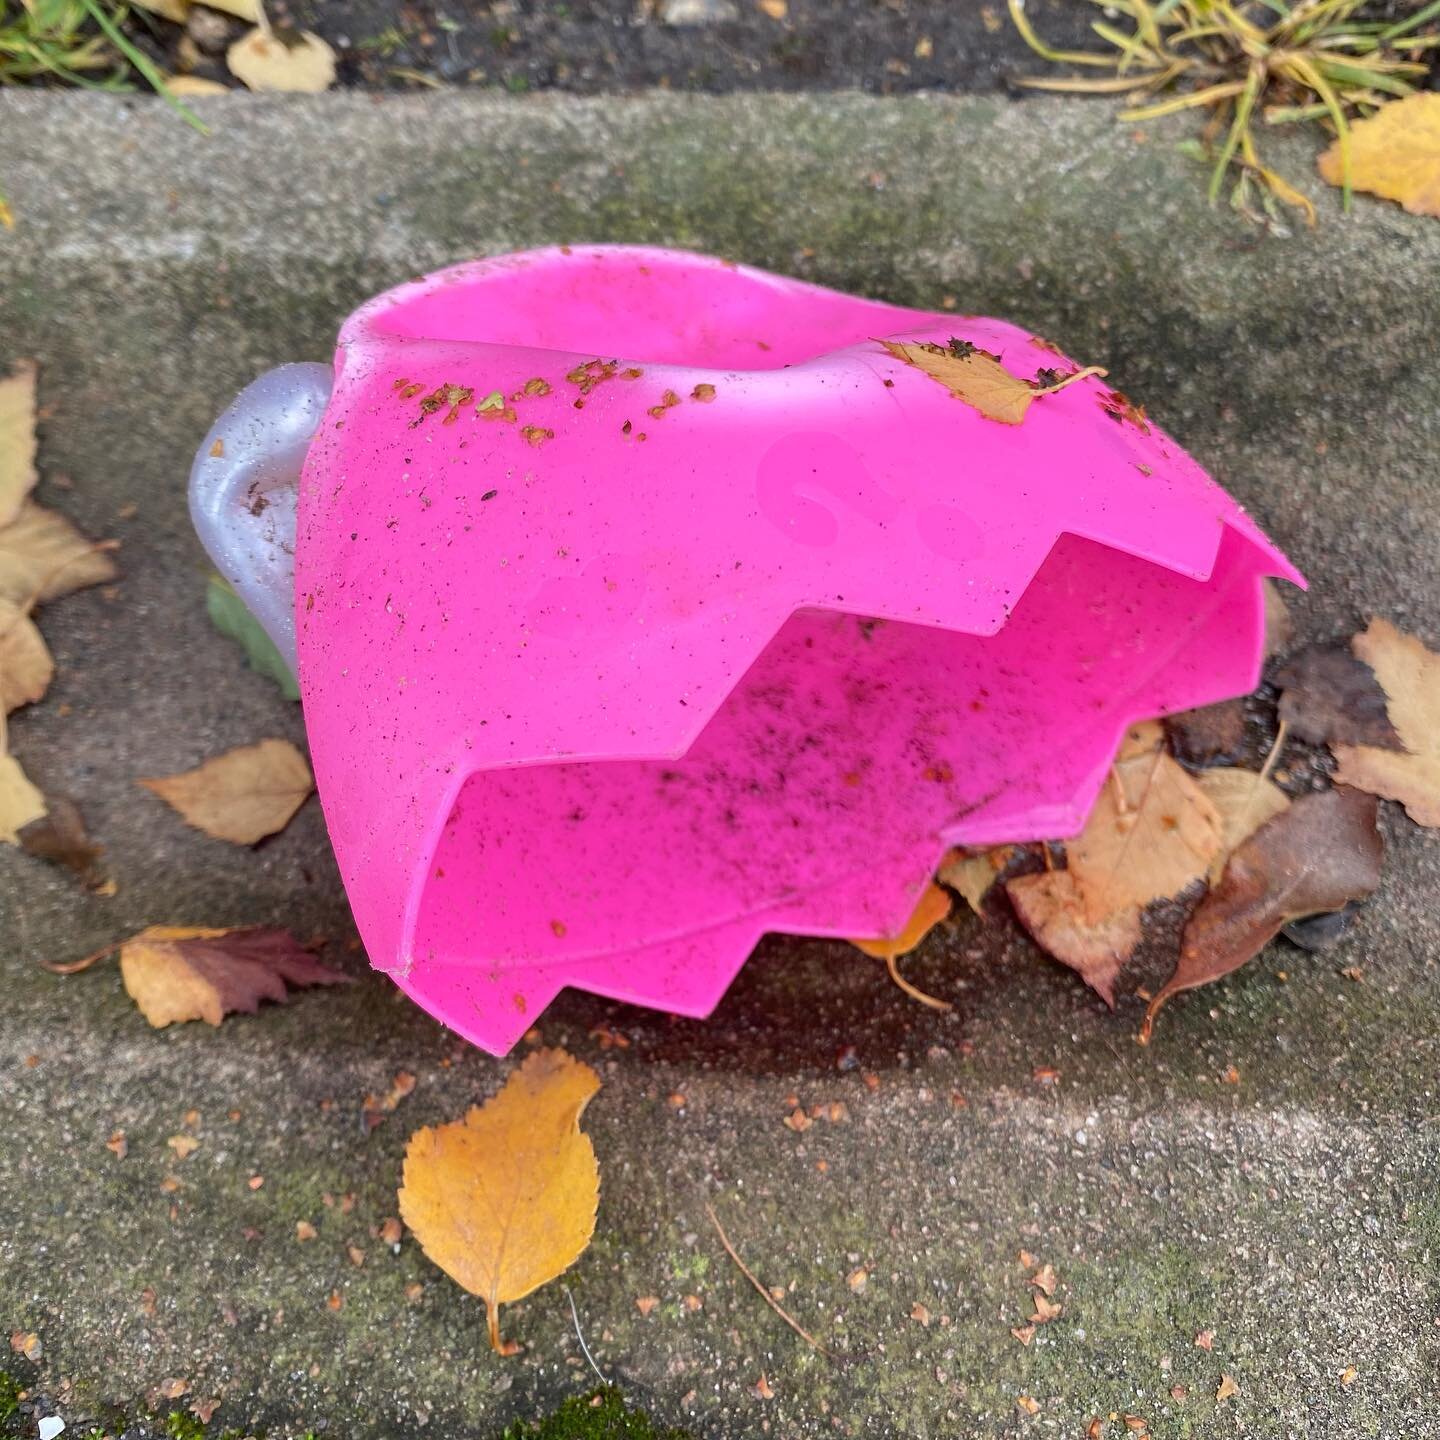 #plastic #foundobjects #found #archive #collection #street #pavement #plasticpollution #plasticpollutes #pink #zigzag